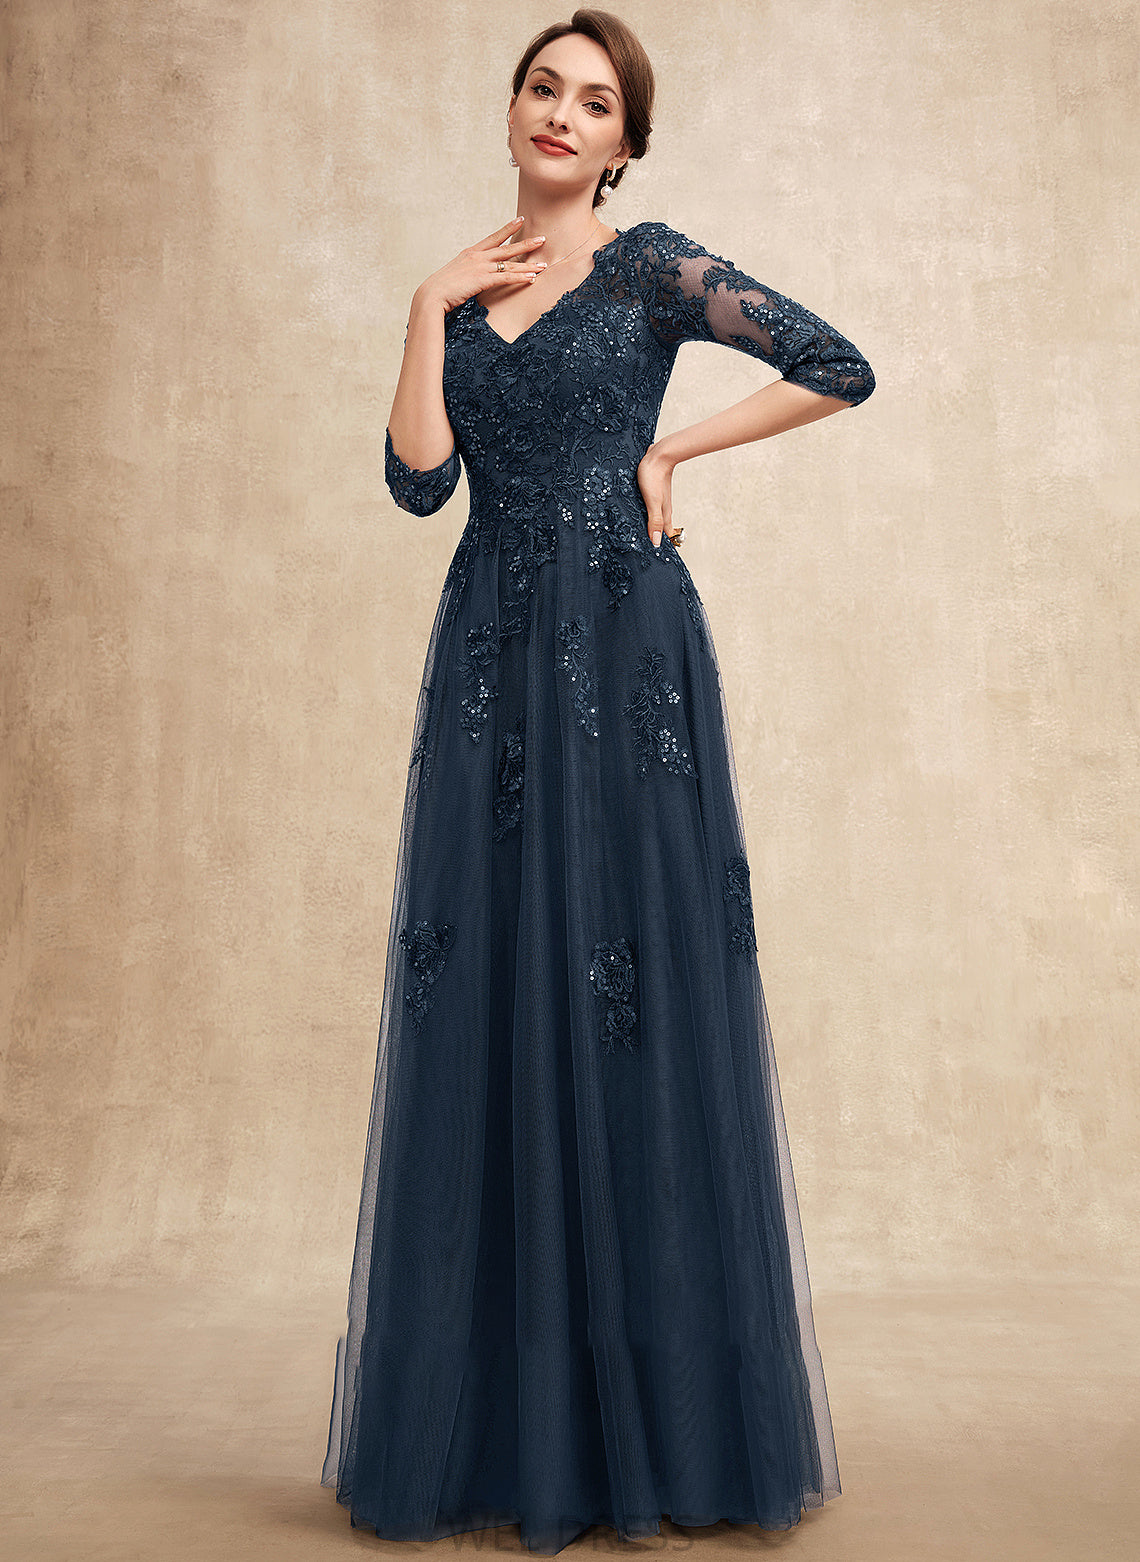 Tulle Irene With Mother of Sequins Lace Floor-Length Mother of the Bride Dresses Bride the Dress A-Line V-neck